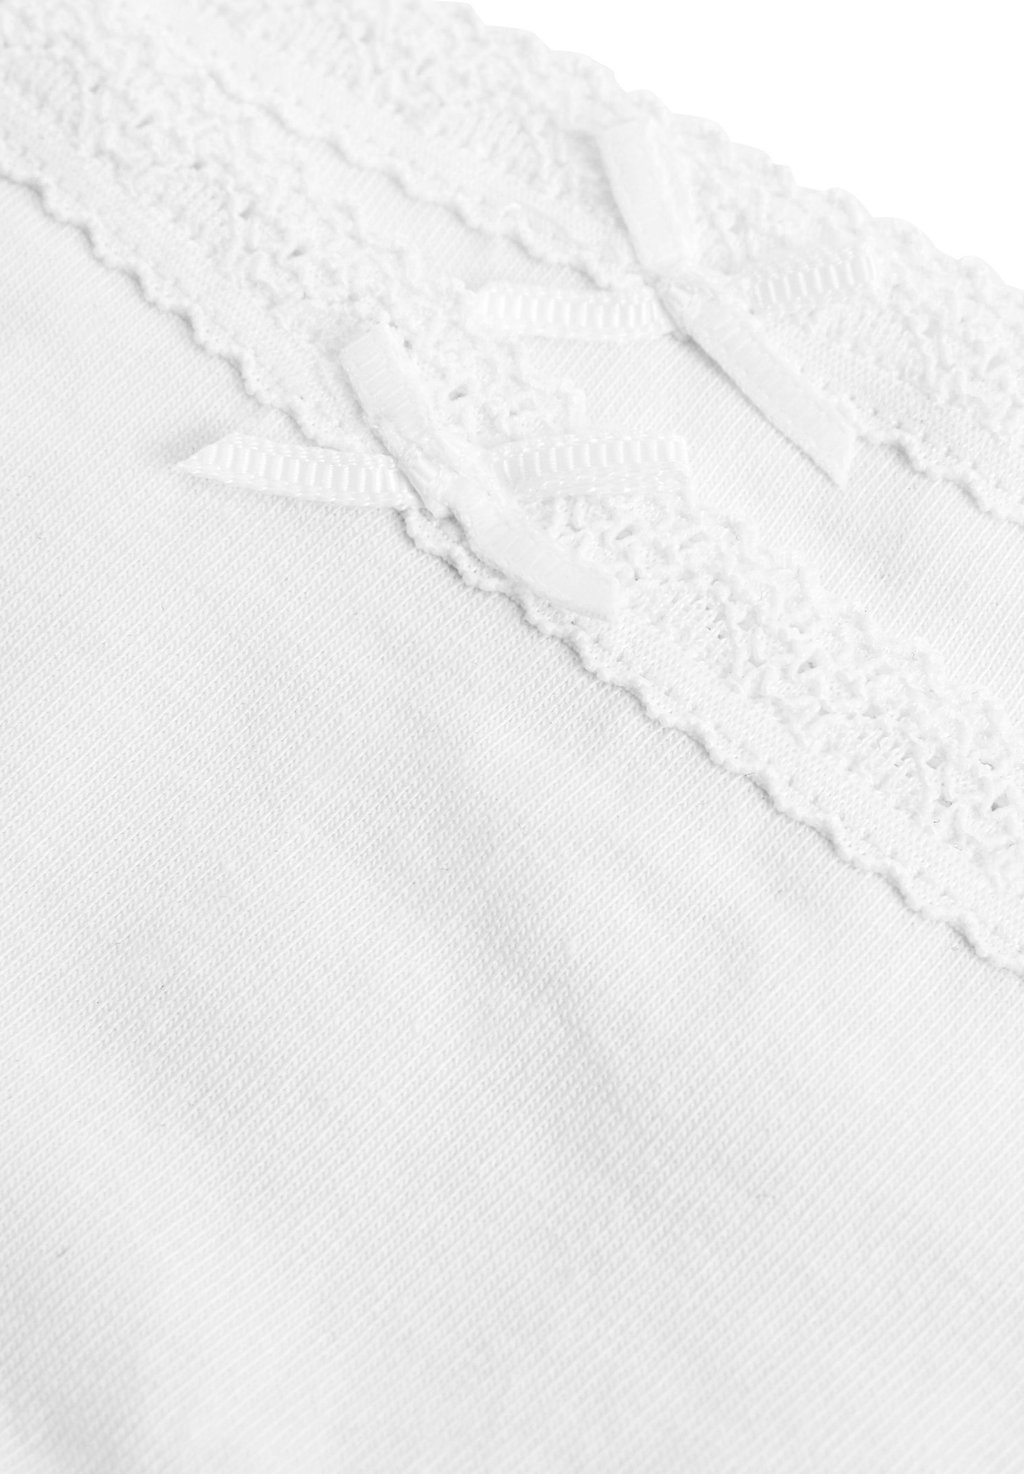 Трусы 10 PACK HIPSTER Next, цвет white lace trim 5 14 yards embryo color beautiful lace accessories cotton sweater side skirt full cotton curtaindiy cotton lace trim ribbon